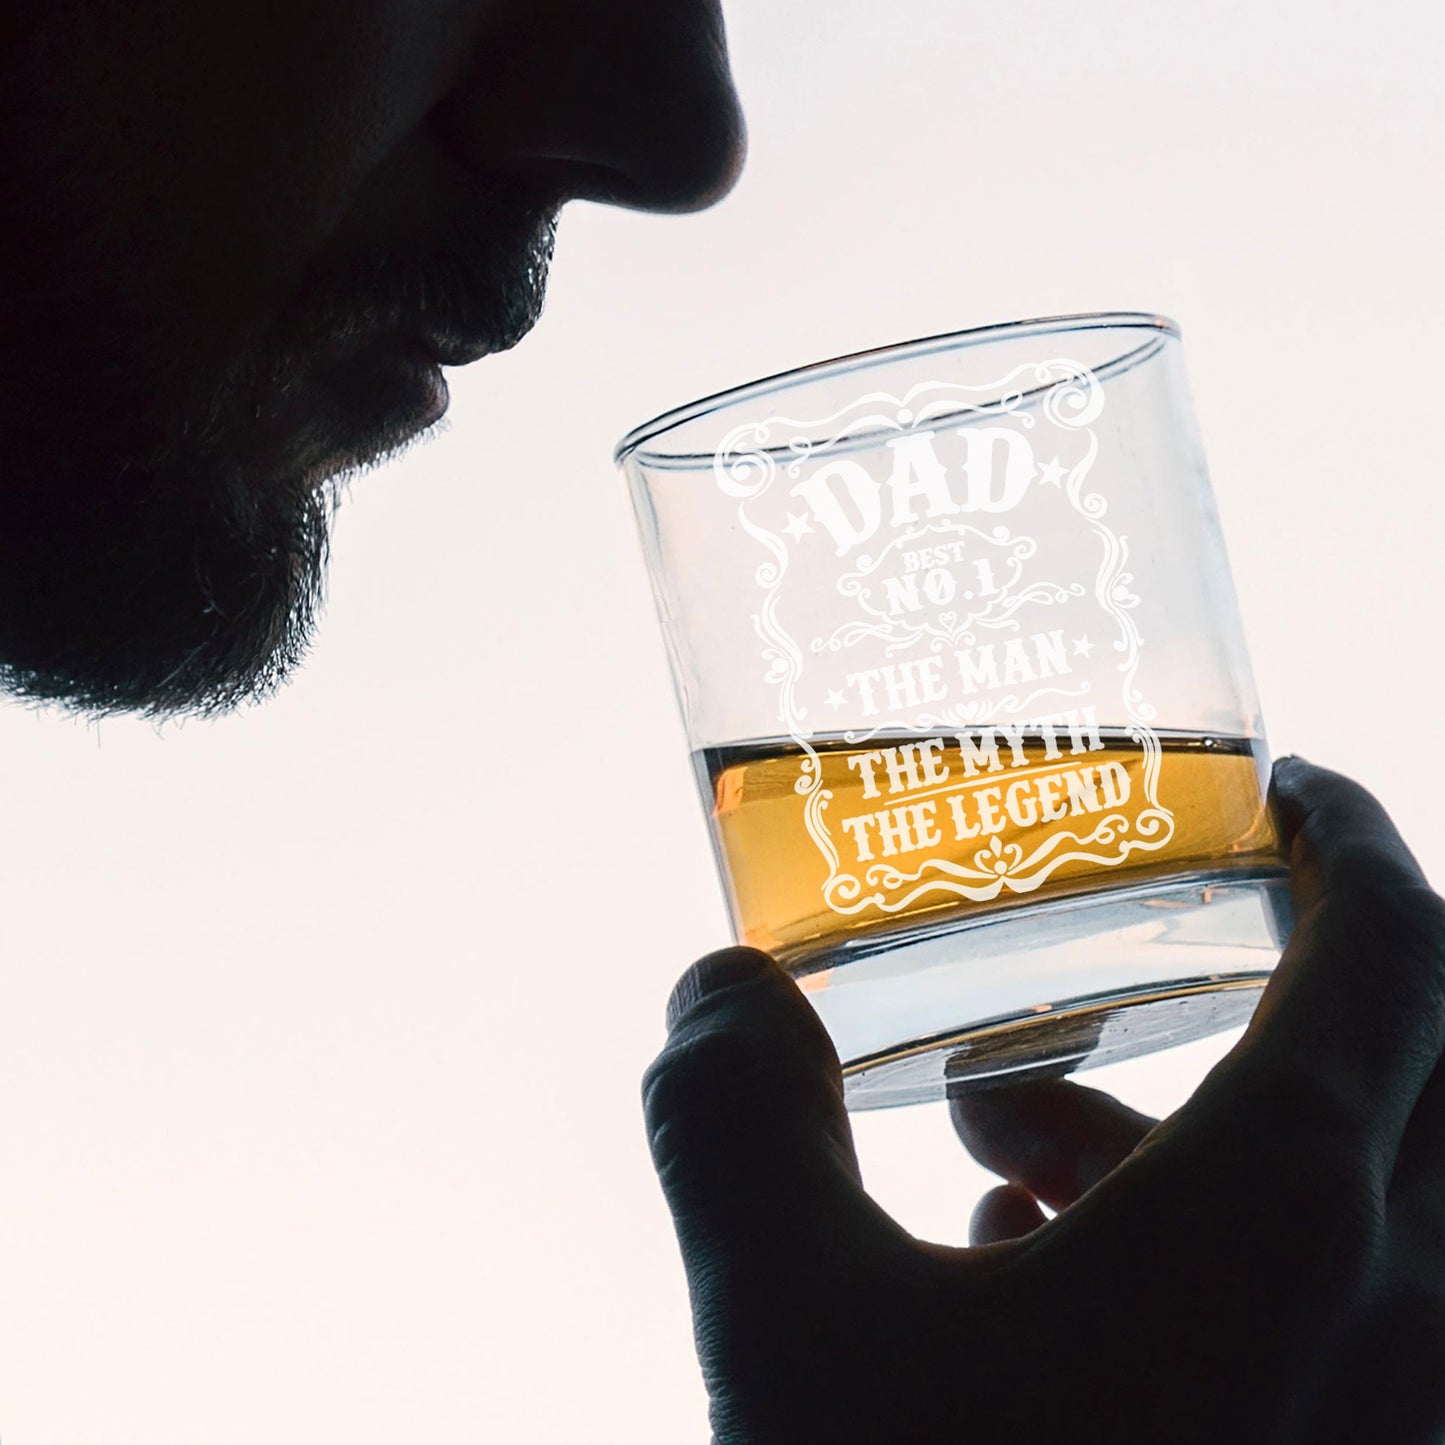 Dad The Man The Myth The Legend Engraved Whisky Glass and/or Coaster Set  - Always Looking Good -   